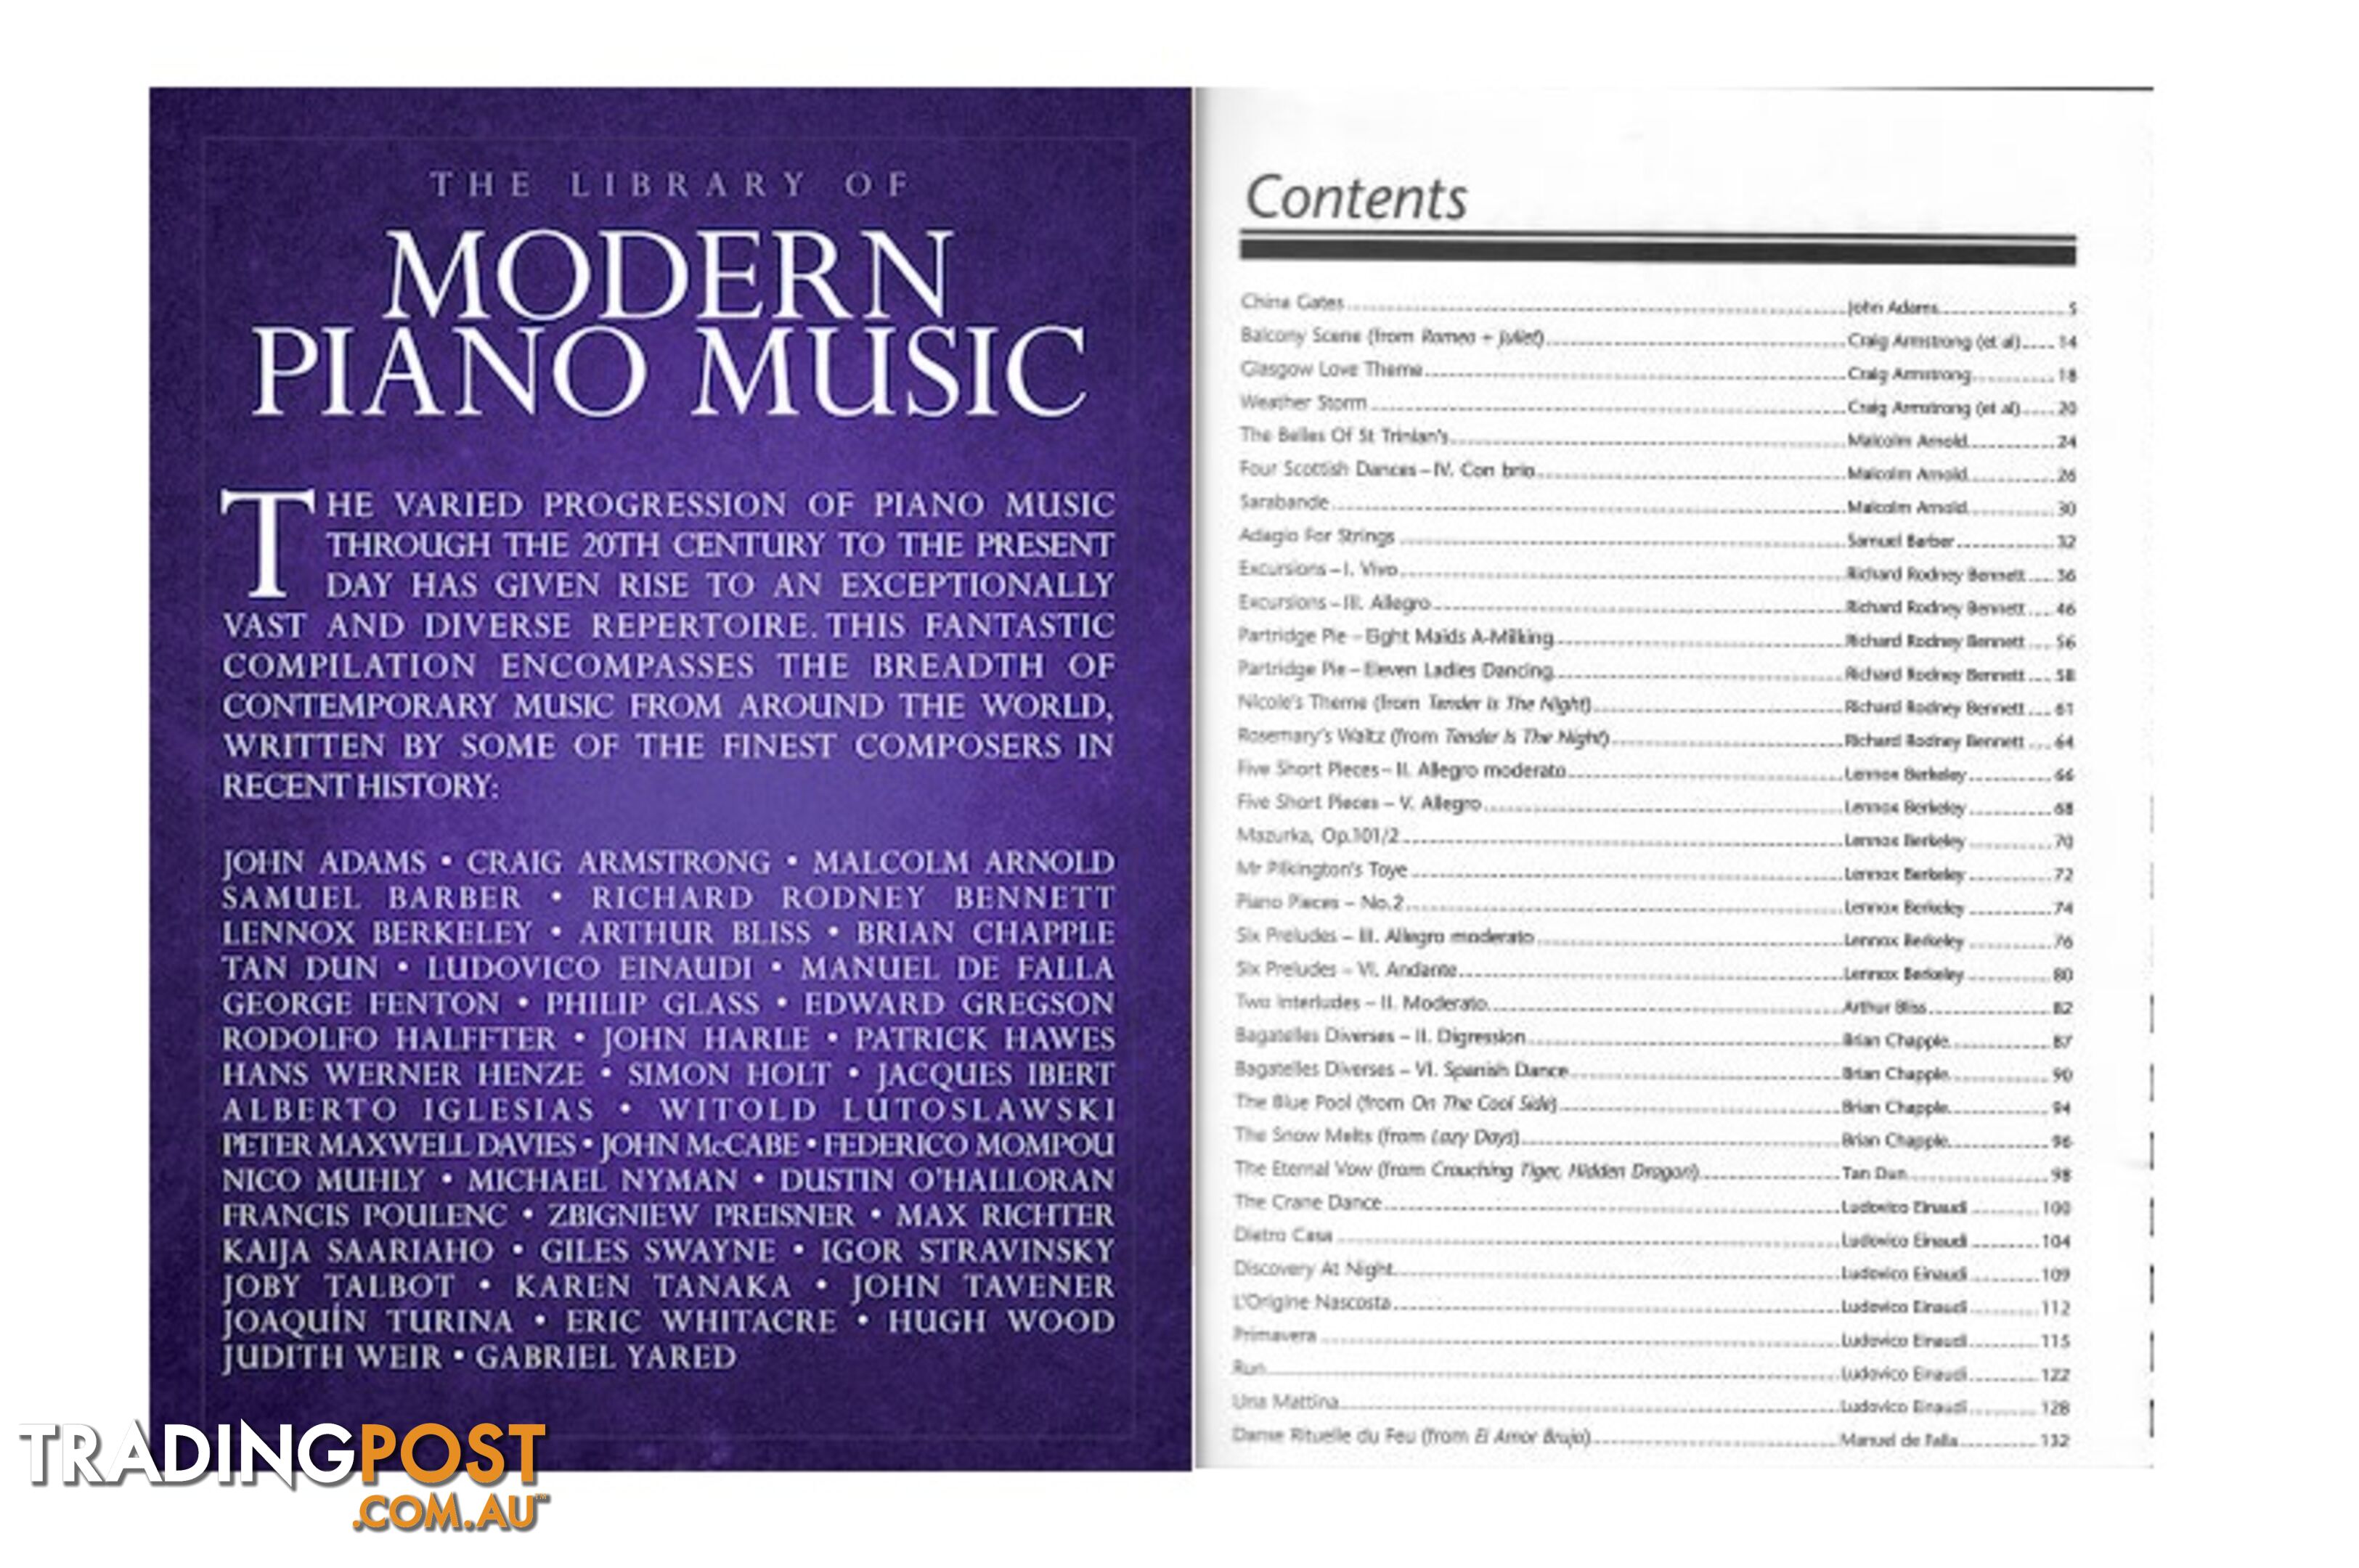 The Library of Modern Piano Music